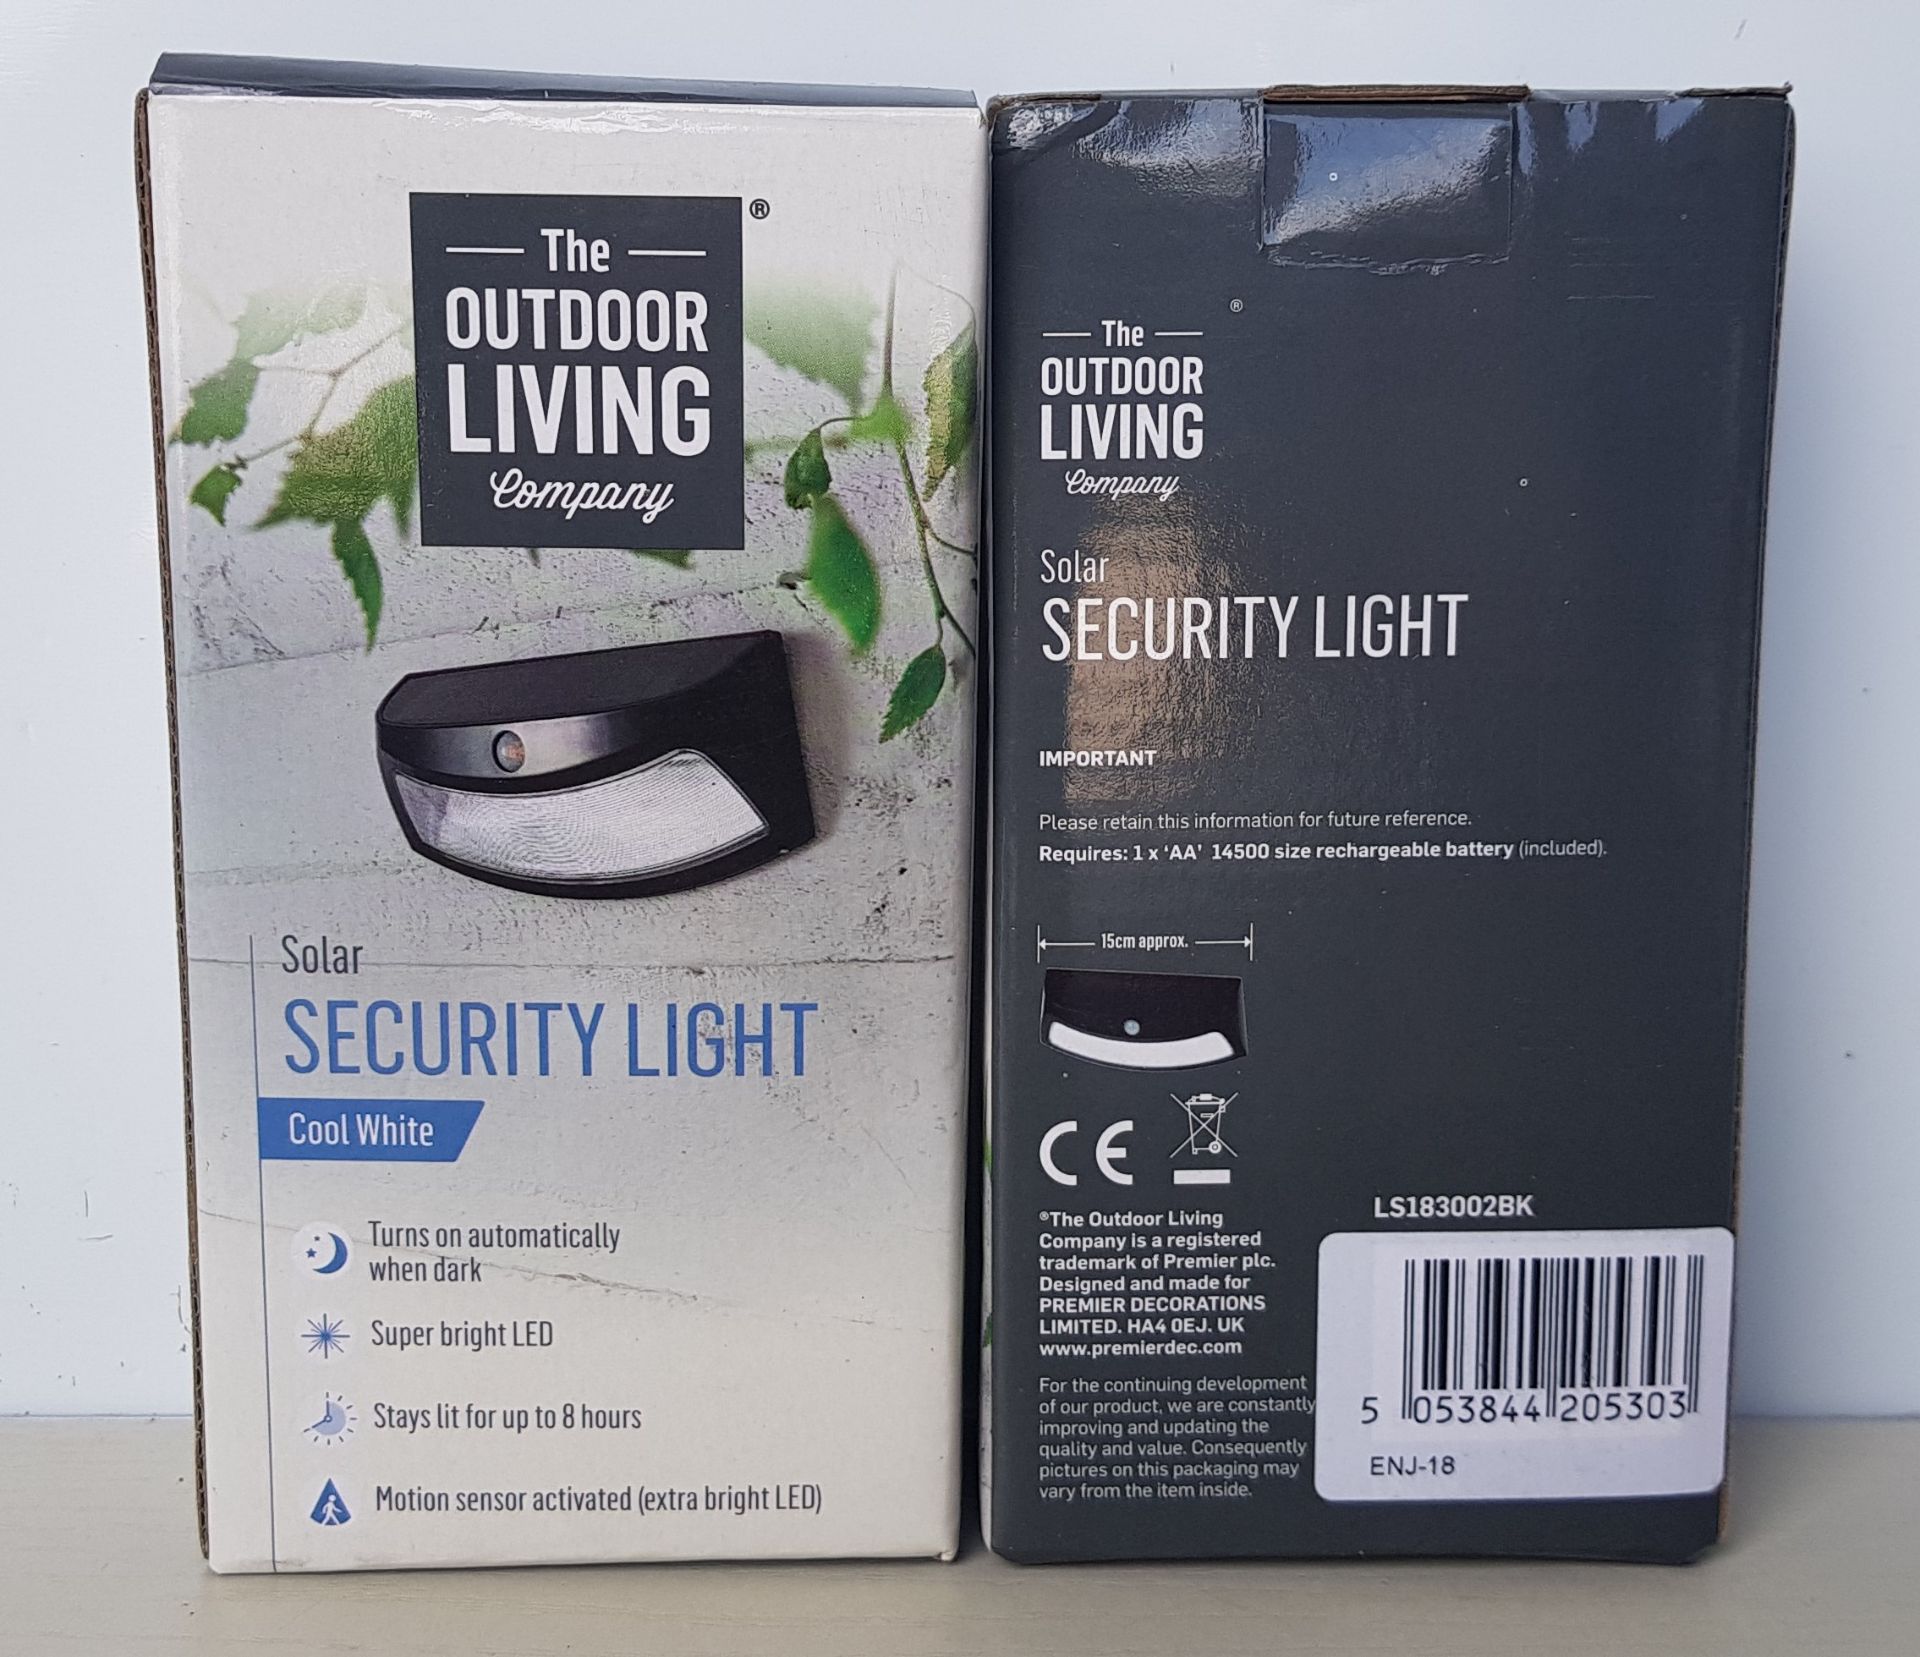 37 X BRAND NEW THE OUTDOOR LIVING SOLAR SECURITY LIGHT COOL WHITE ) - STAYS LIT FOR UP TO 8 HRS -